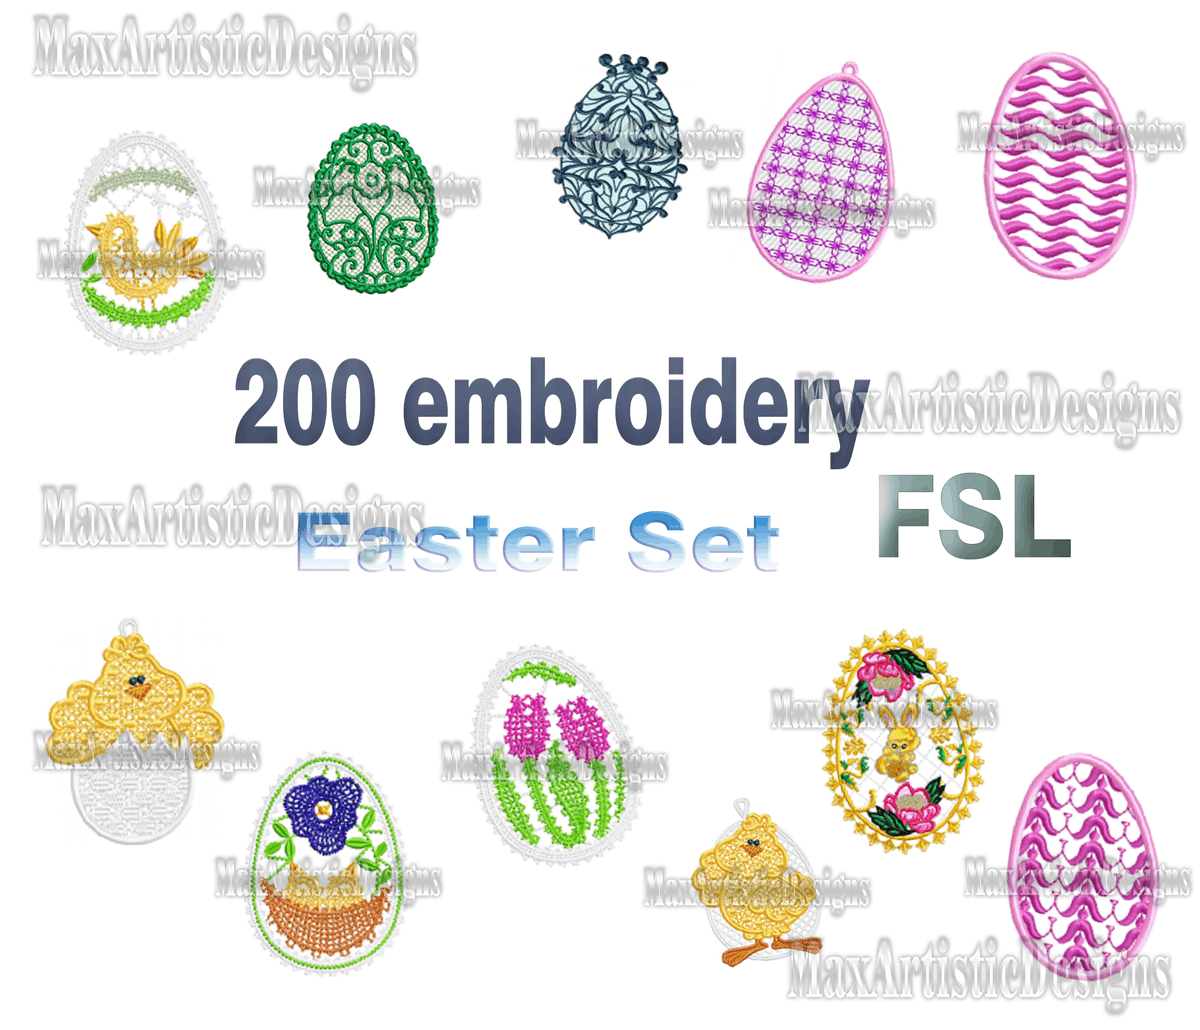 240+ fsl easter eggs embroidery files in PES PDF formats for machine embroidery projects - Download tinyurl.com/2yasxnce